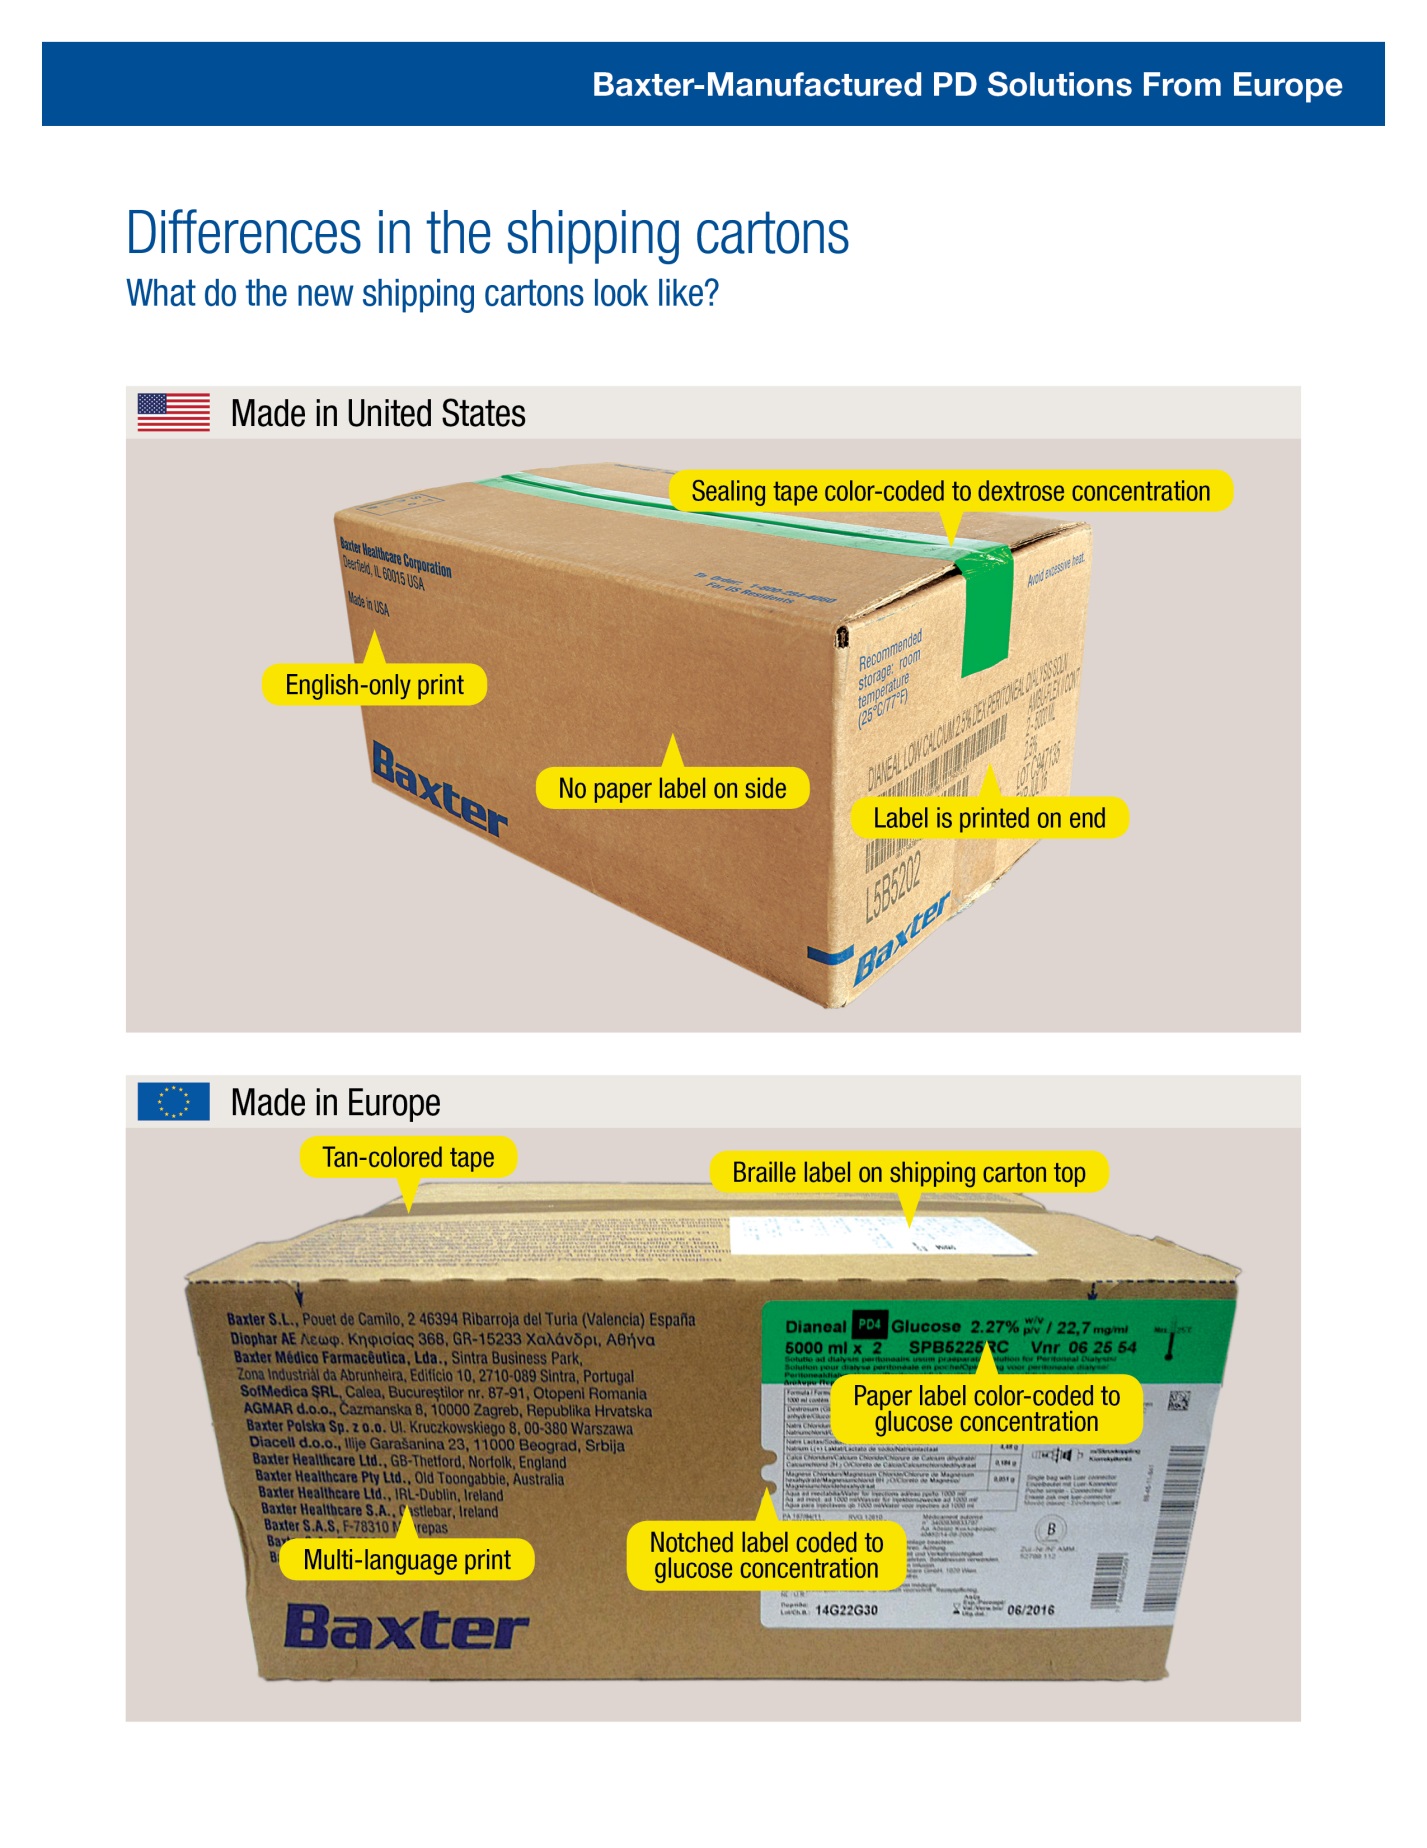 Differences in the shipping cartons